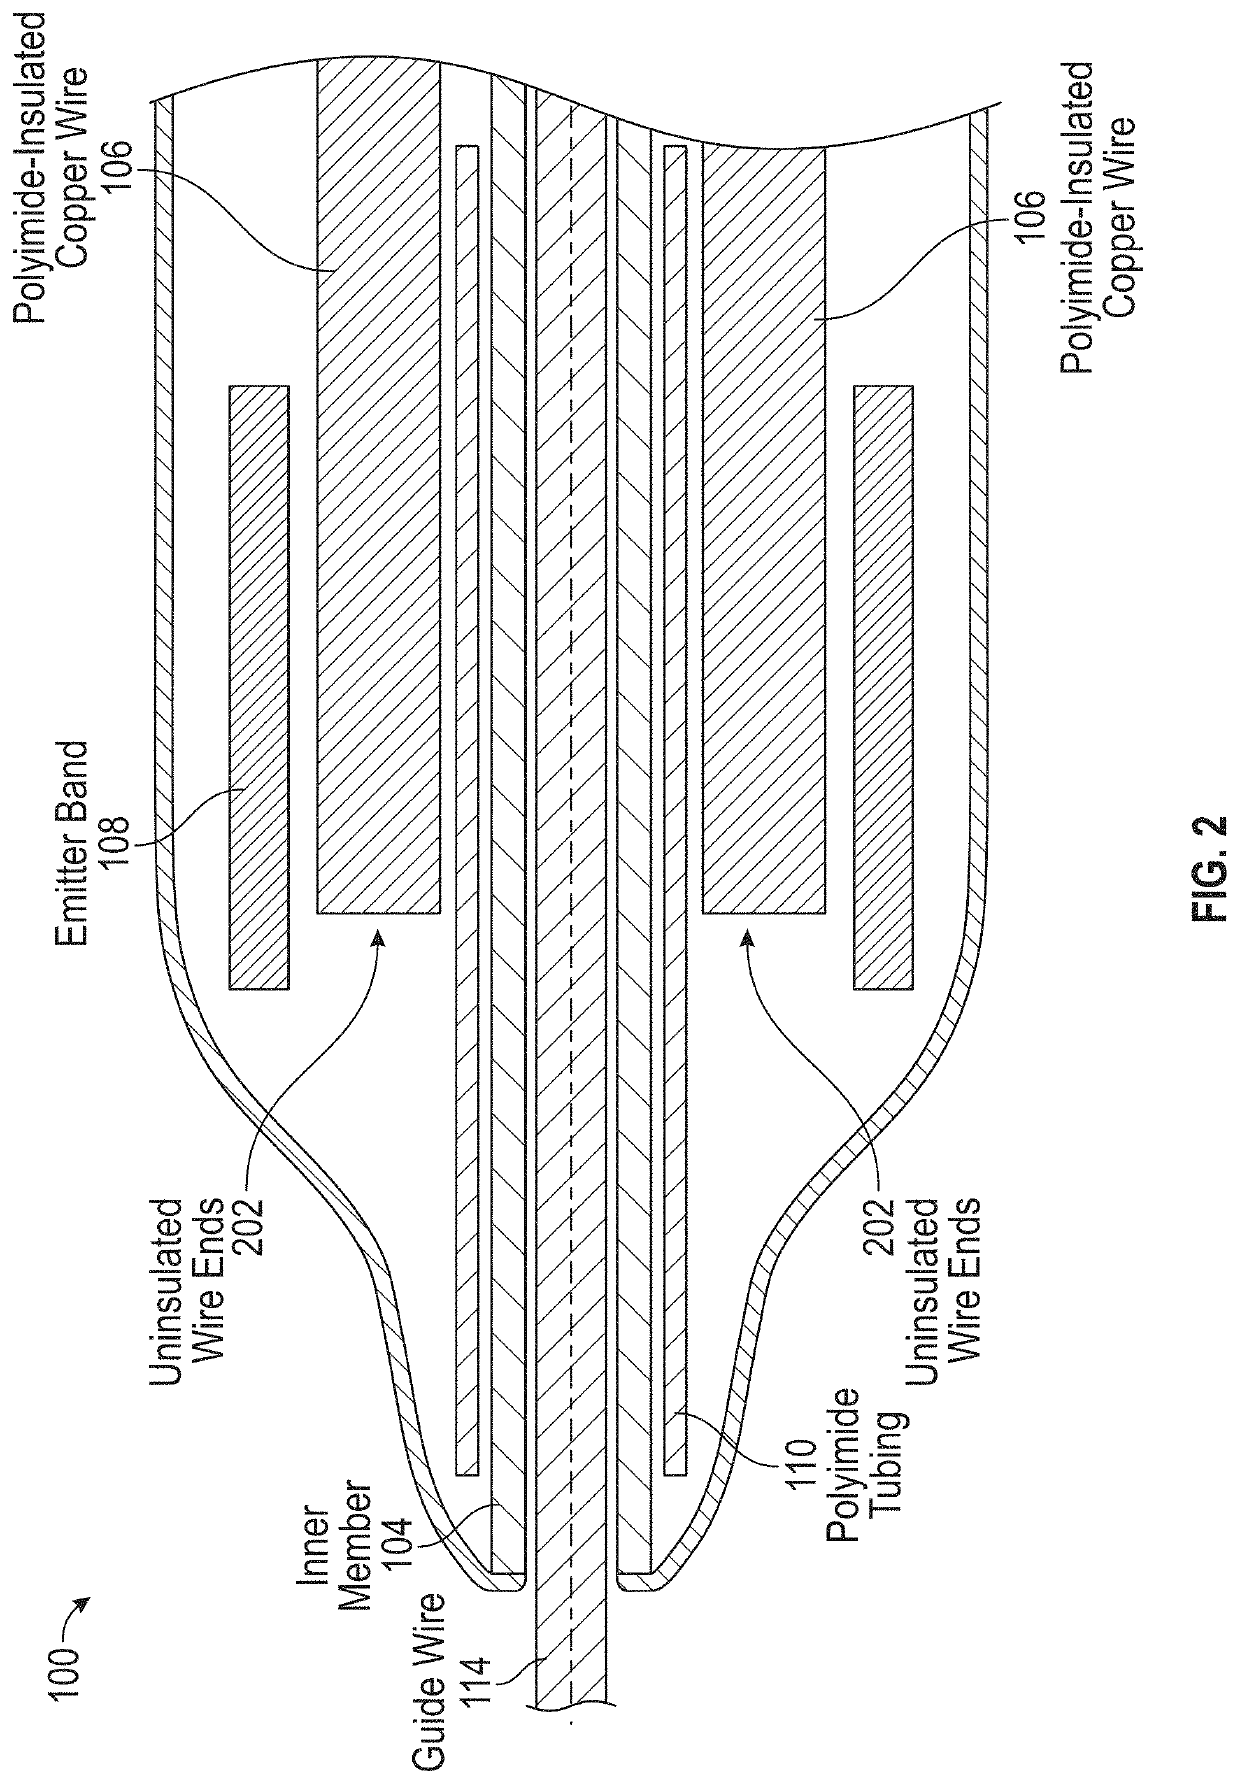 Device and method for generating forward directed shock waves